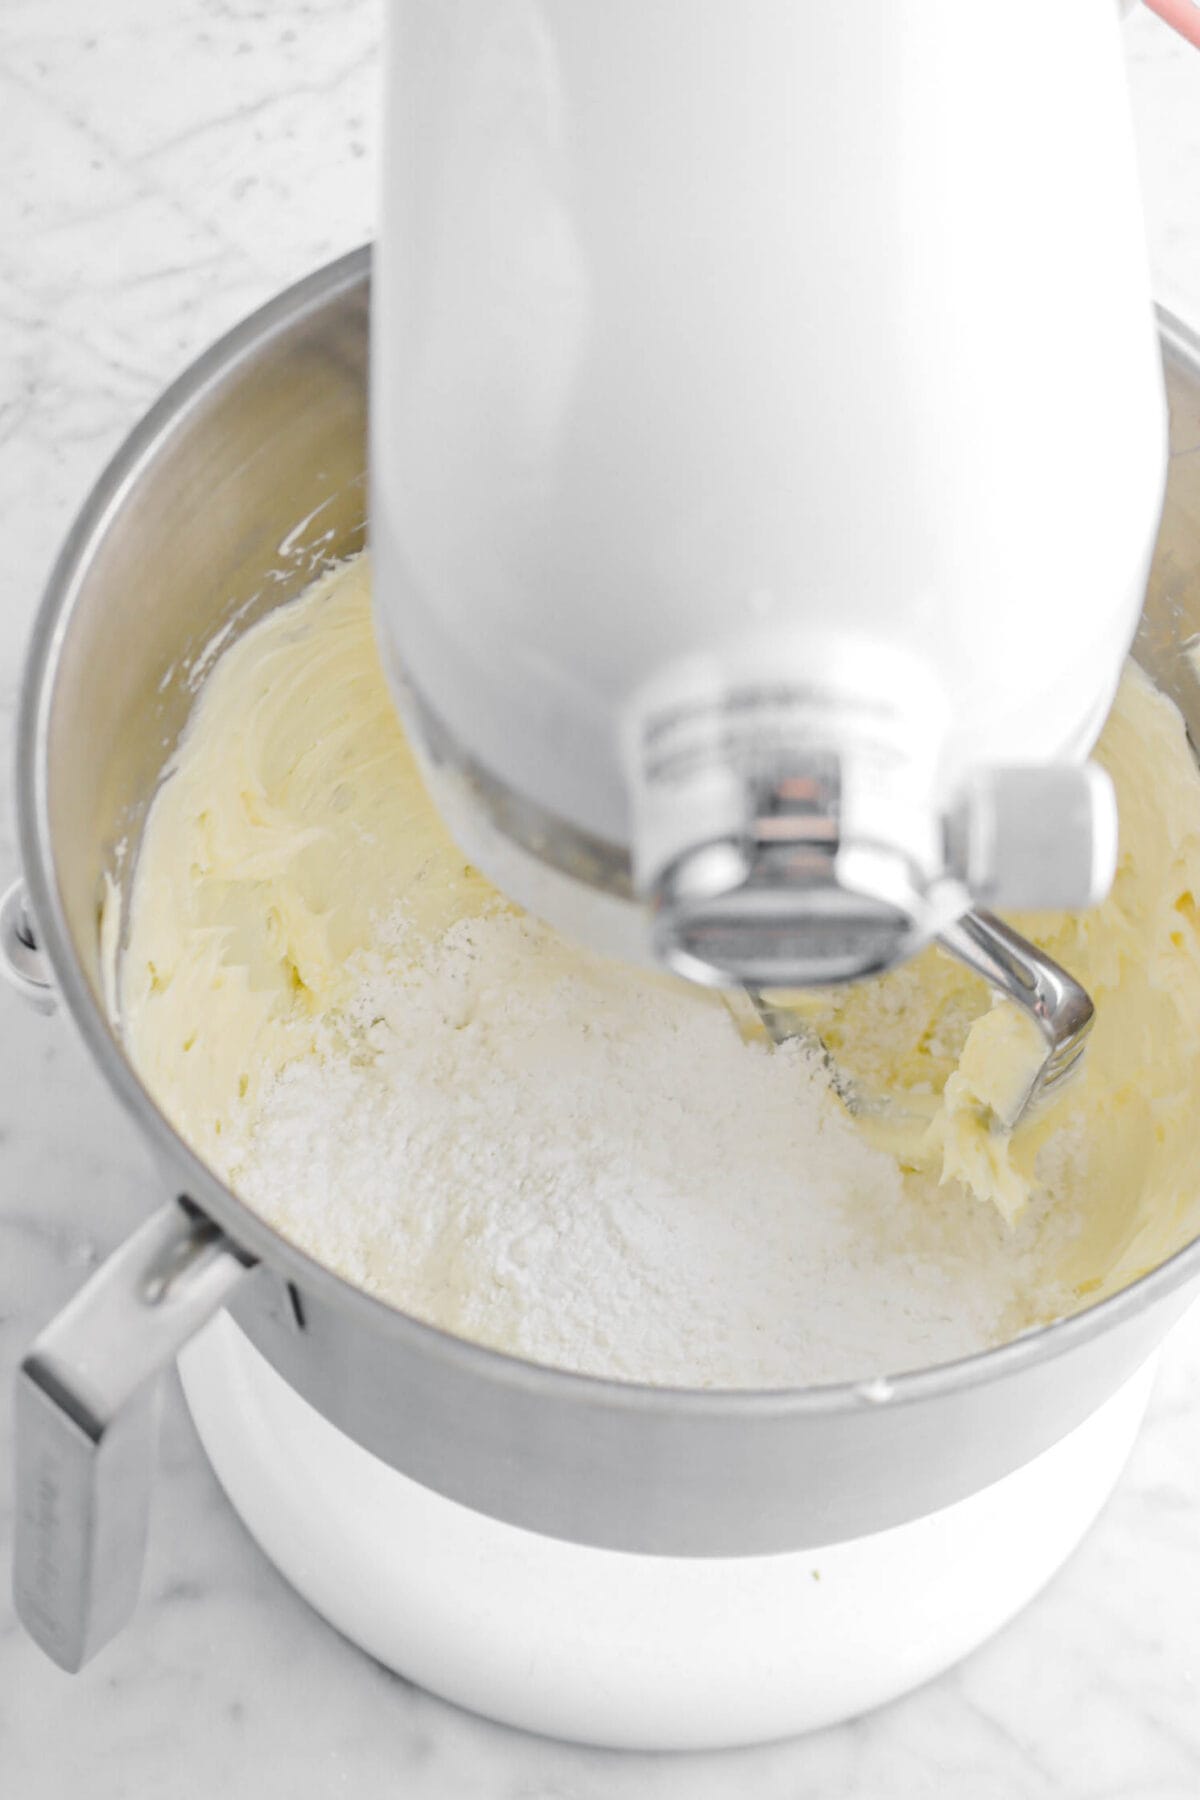 Powdered sugar and creamed butter in stand mixer bowl